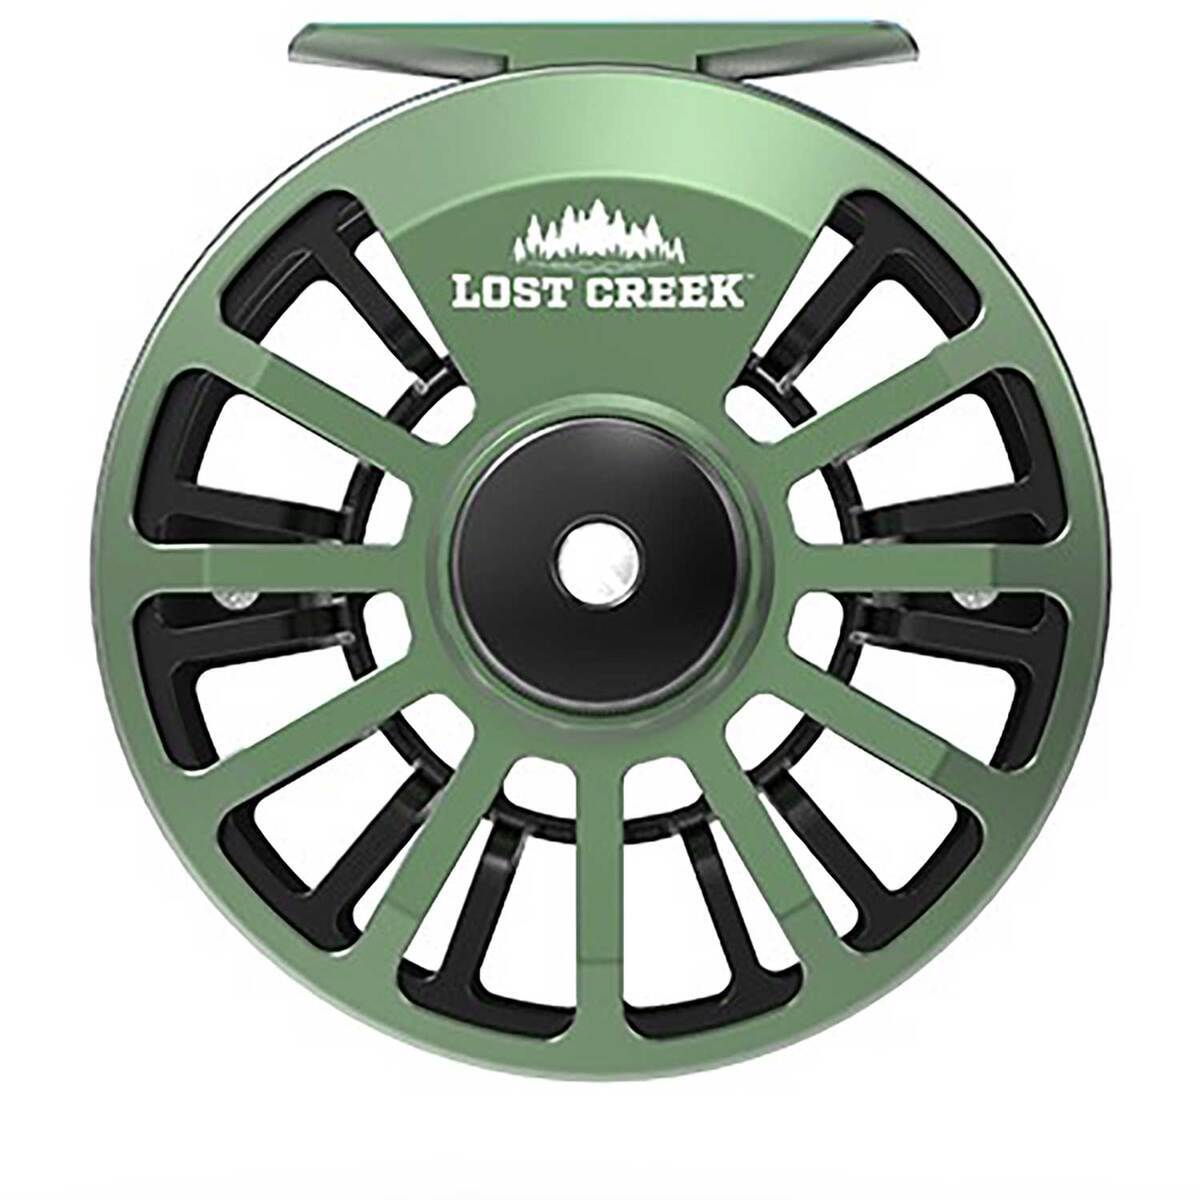 Lost Creek Large Arbor Fly Fishing Reel - Green 5/6wt by Sportsman's Warehouse